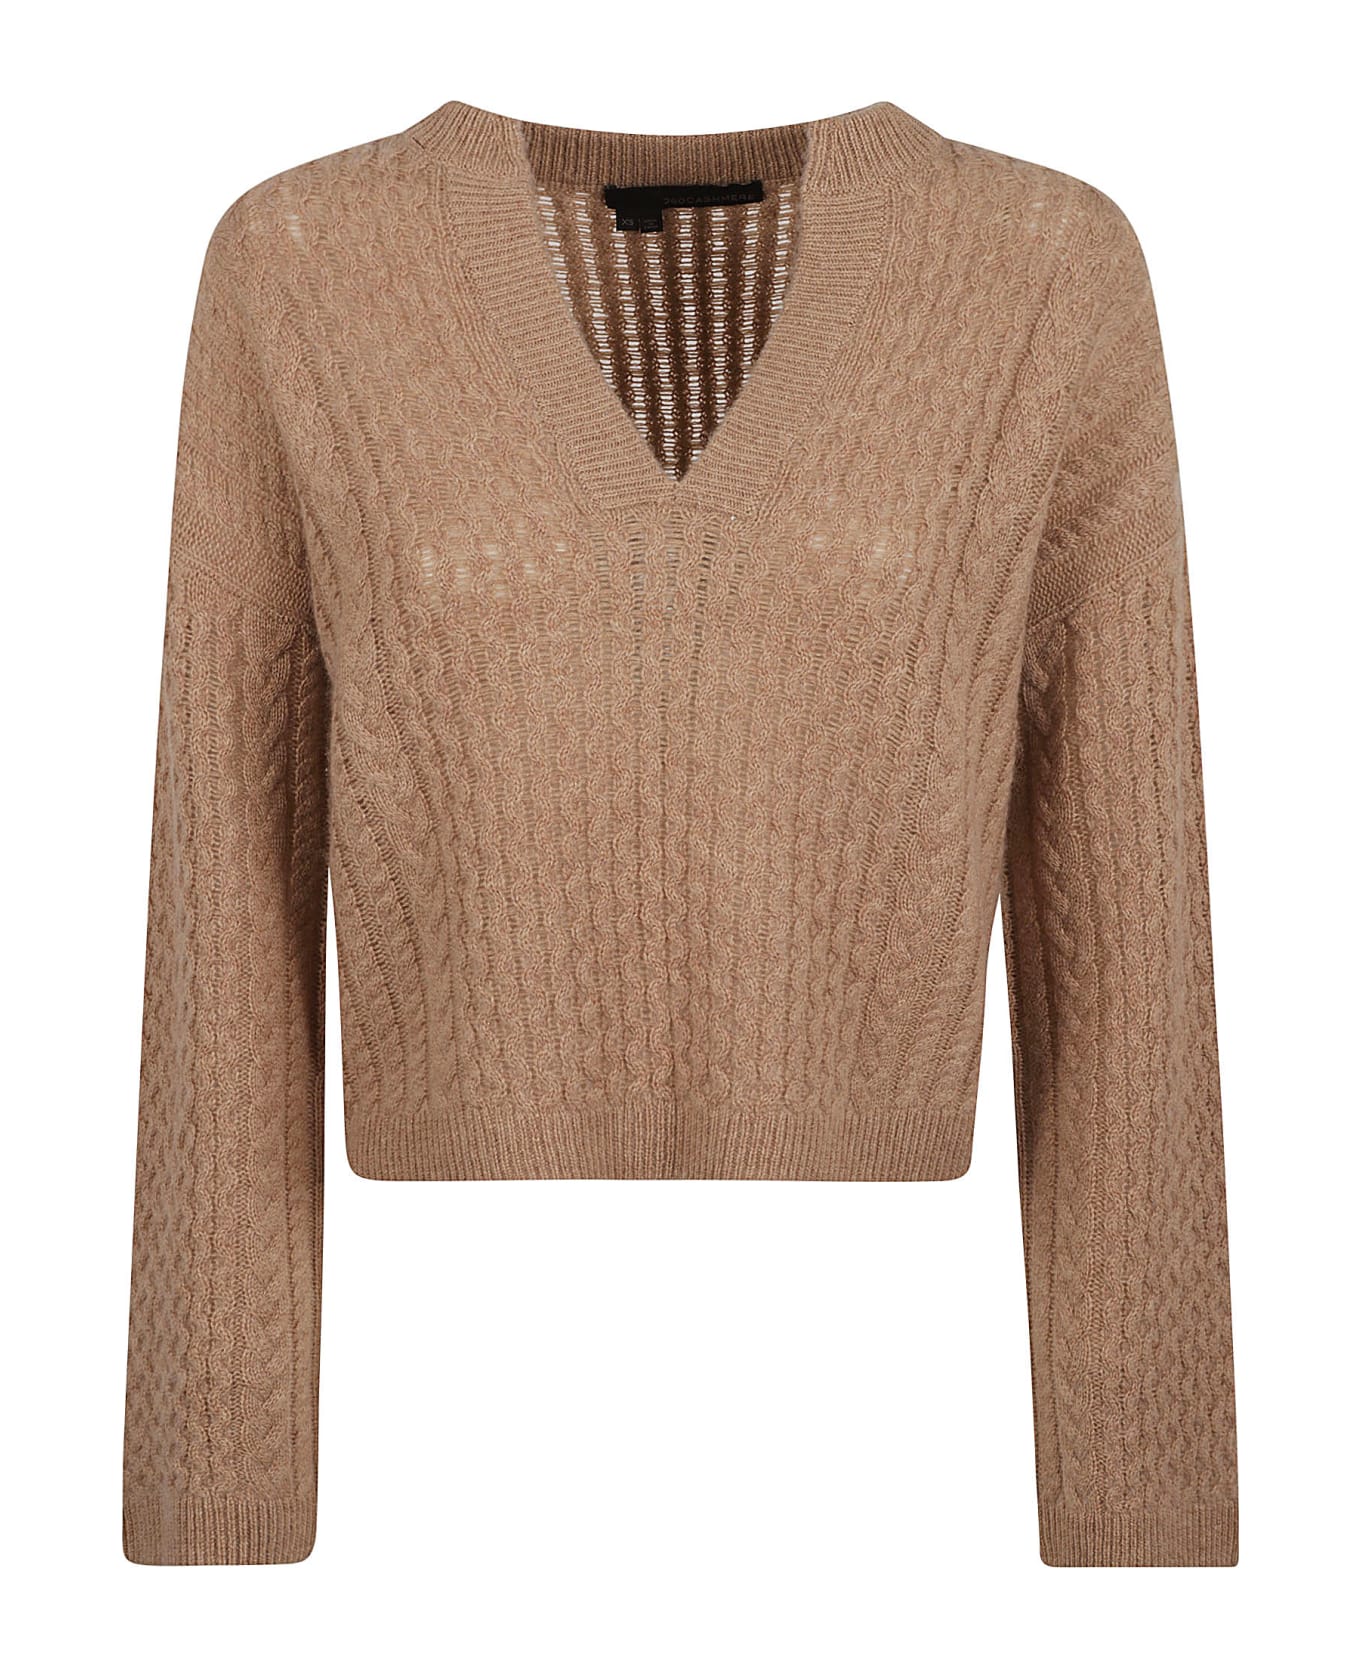 360Cashmere V-neck Cable-knit Sweater - Vicuna